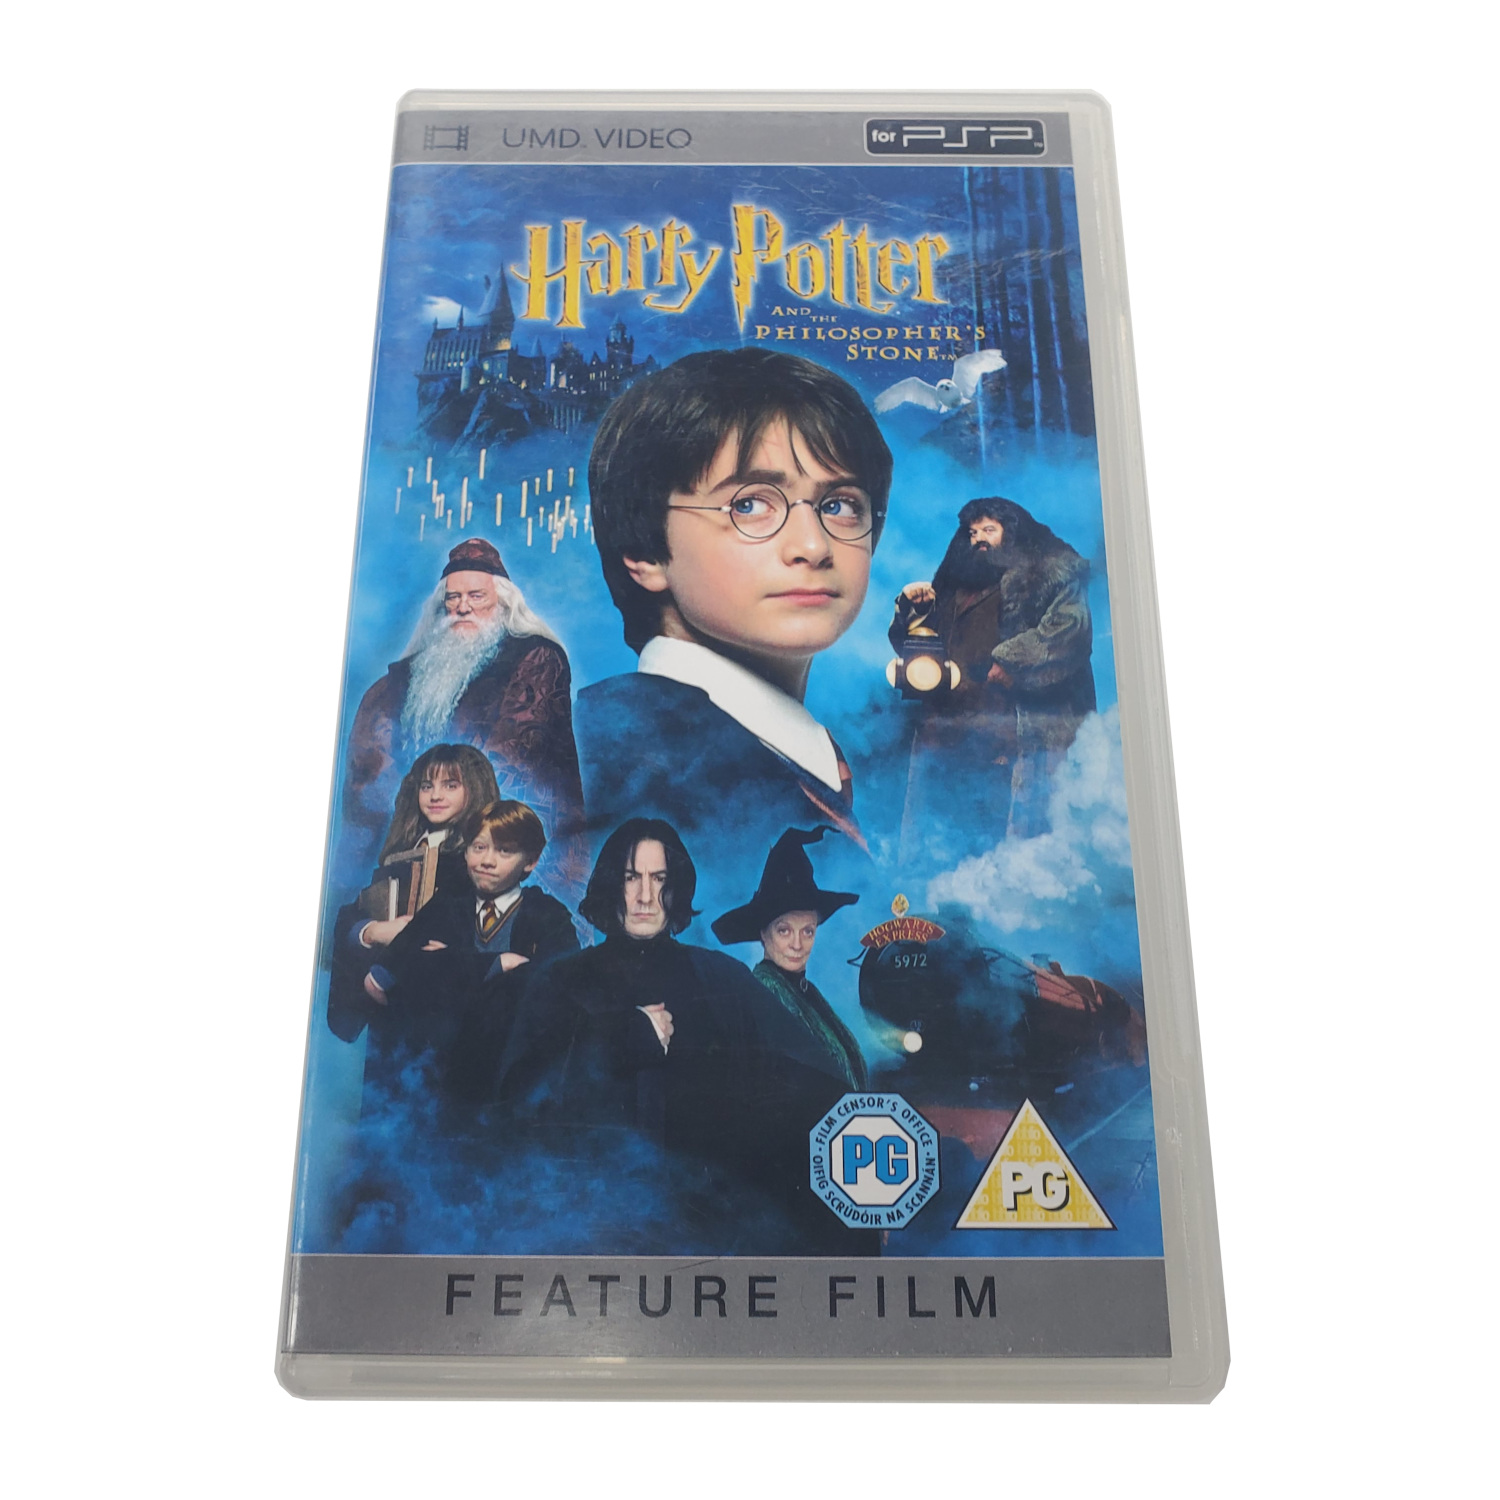 Harry Potter & The Philosopher's Stone UMD: Begin the Magical Adventure!